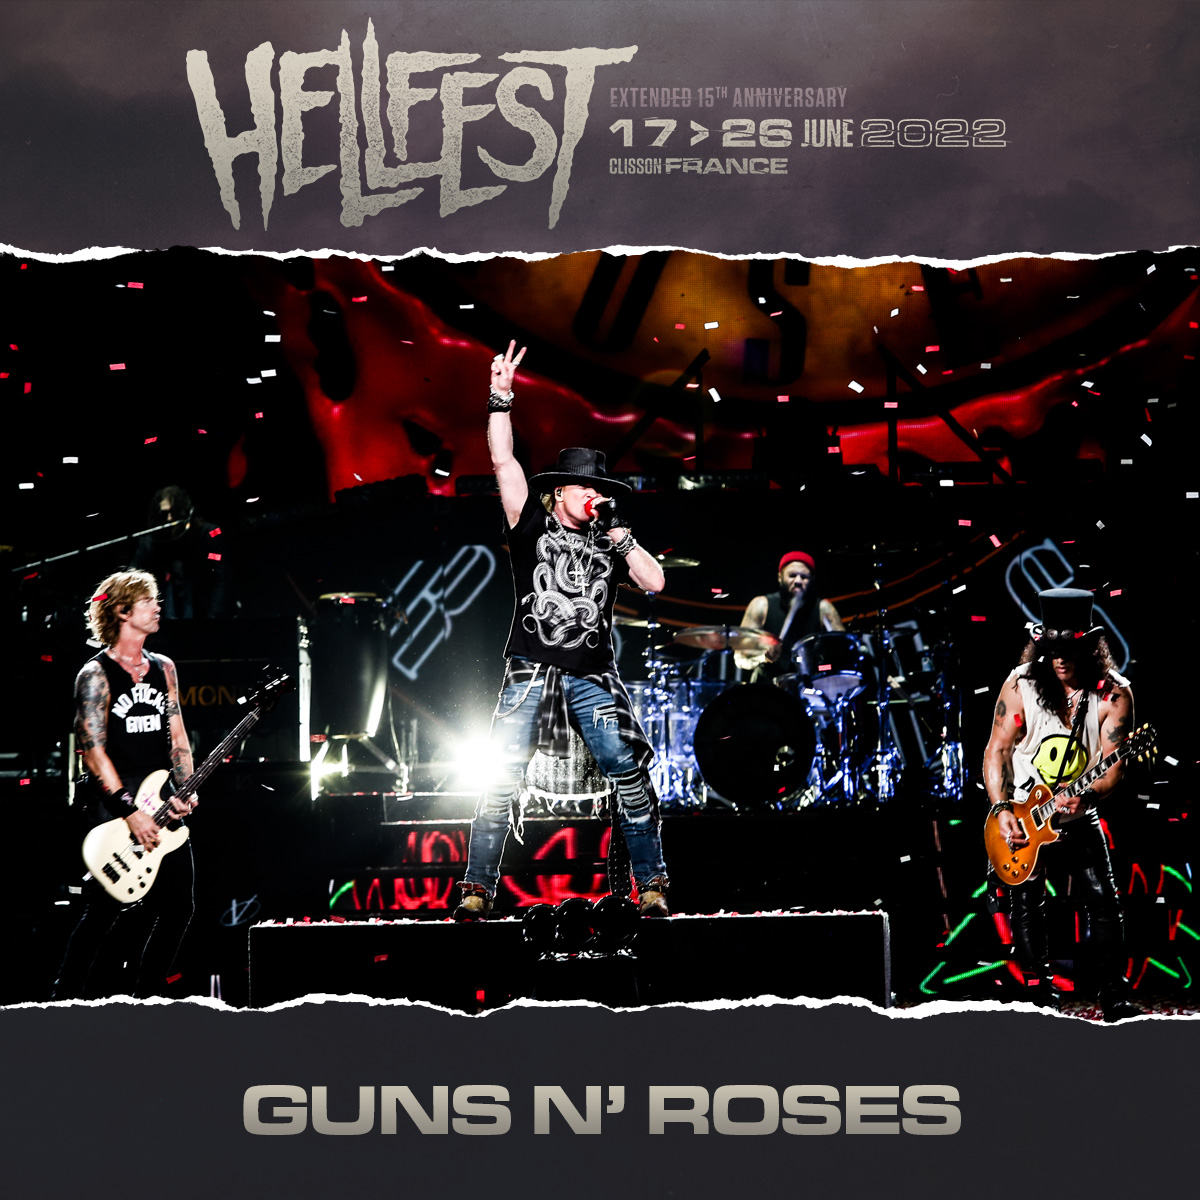 Guns n' roses hellfest 2022 sold out